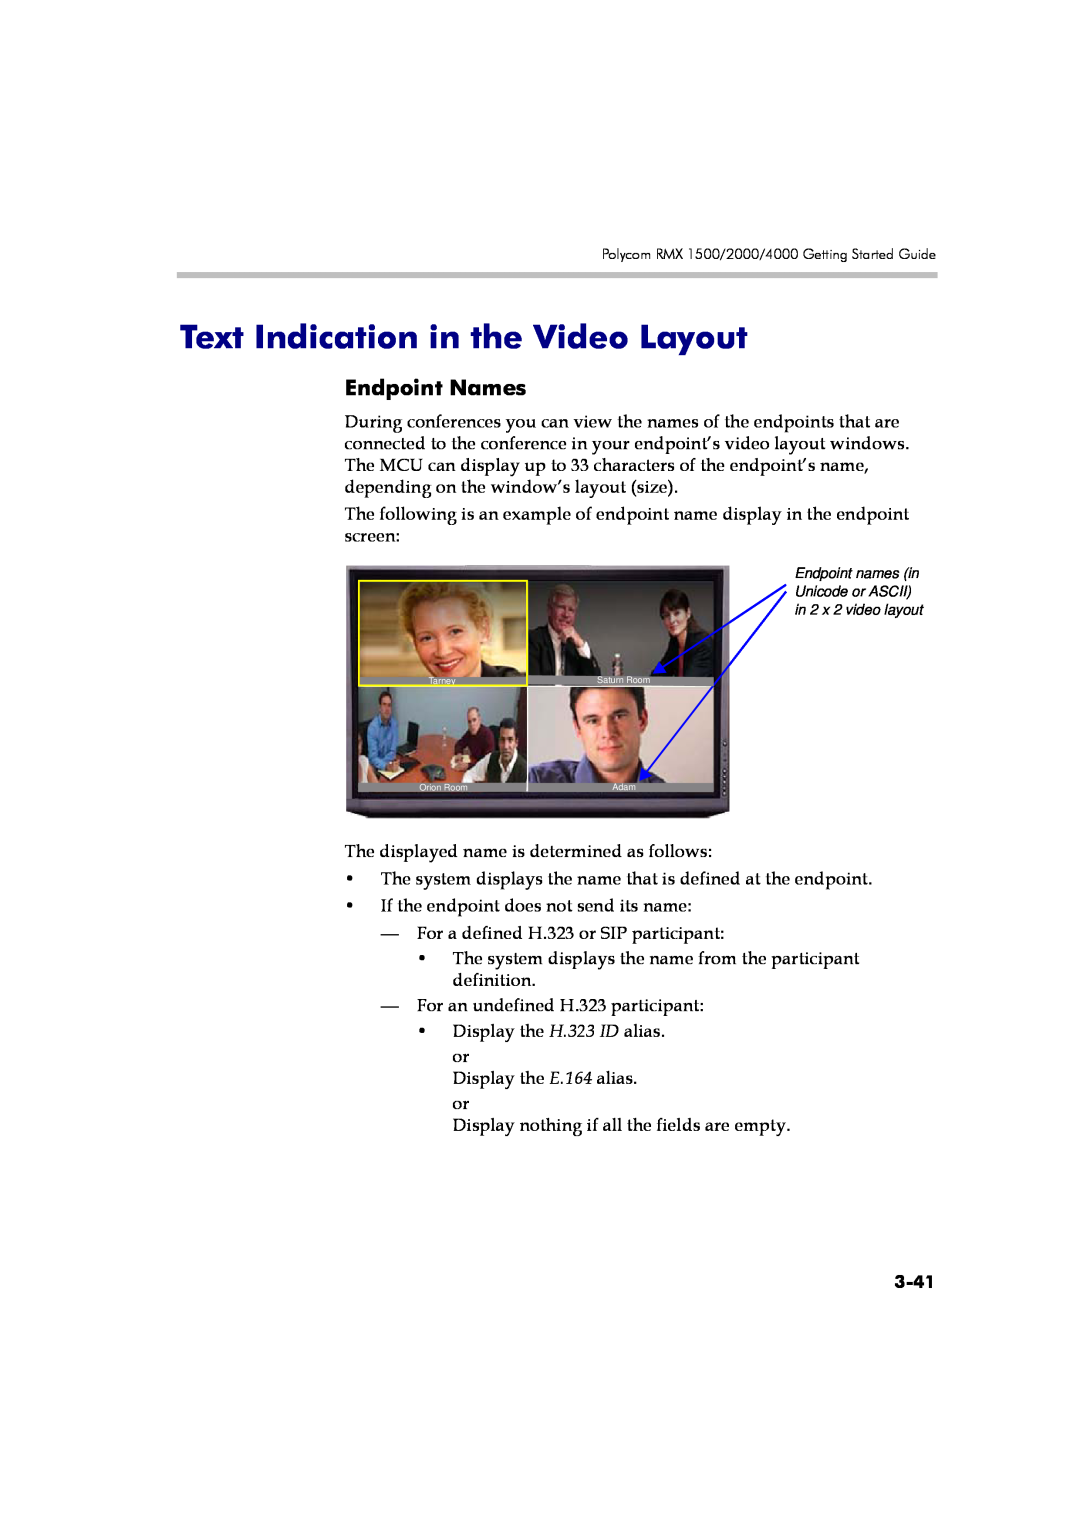 Polycom DOC2560A manual Text Indication in the Video Layout, Endpoint Names, 3-41 